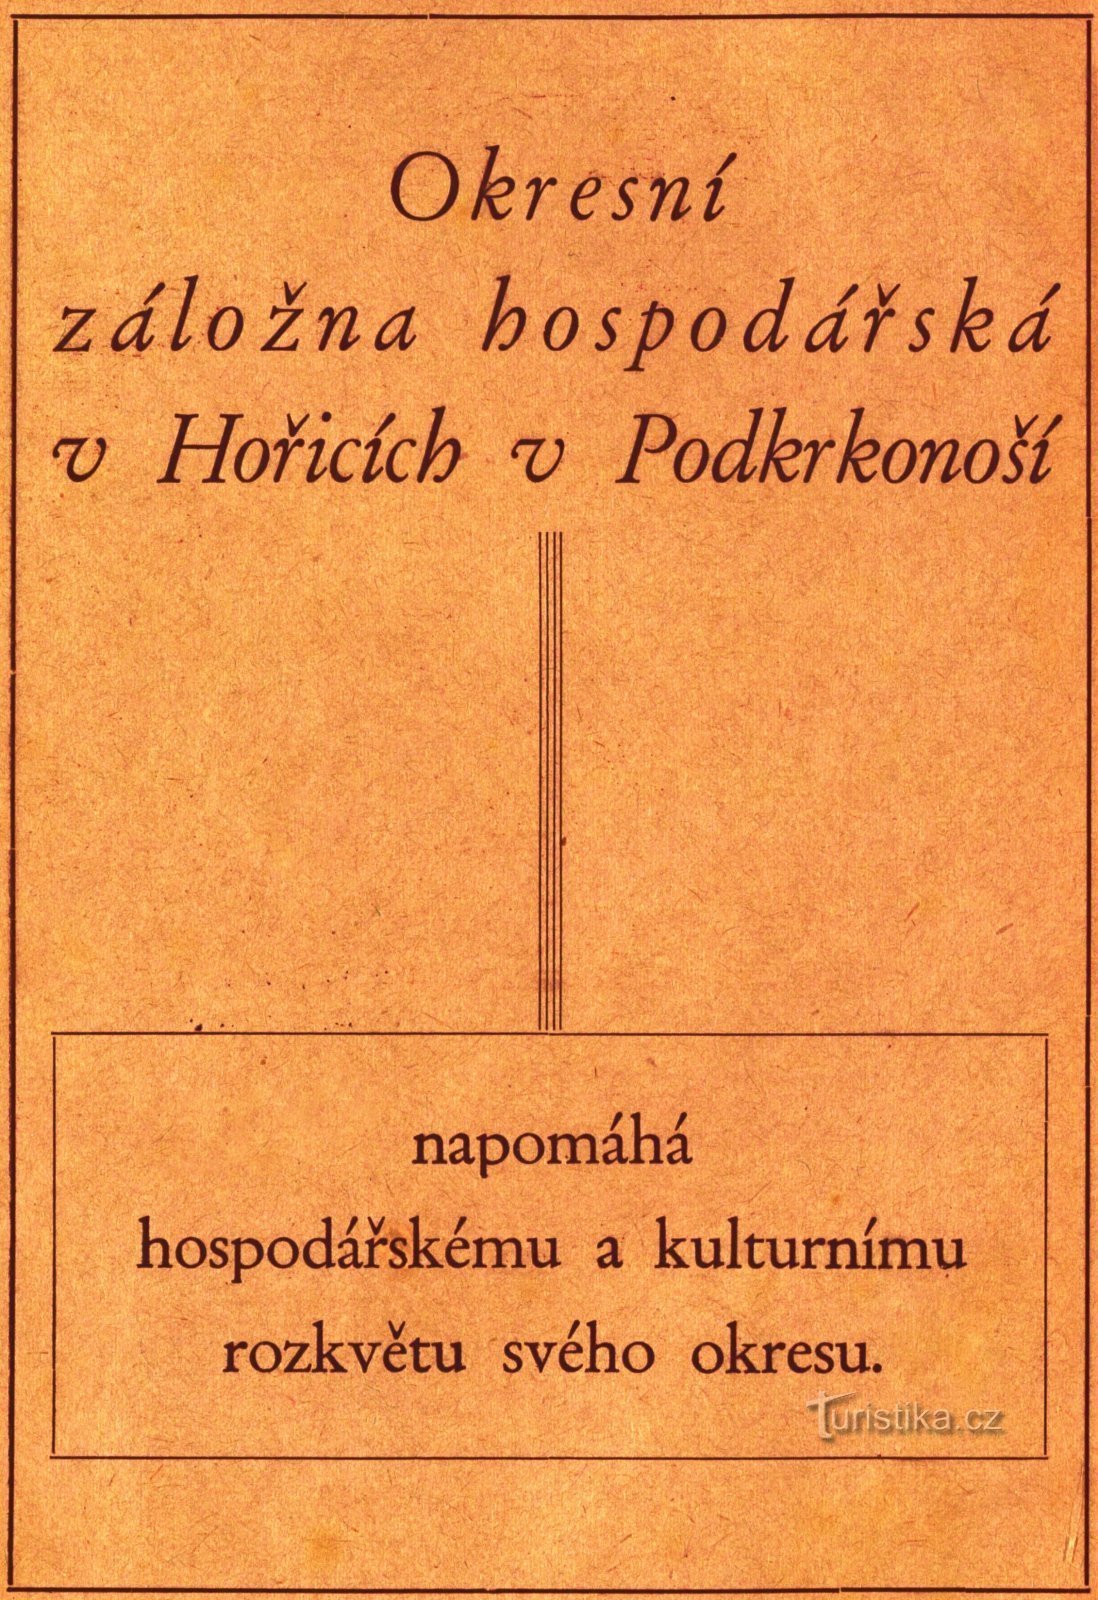 Period advertisement of the District Economic Savings Bank in Hořice from 1948